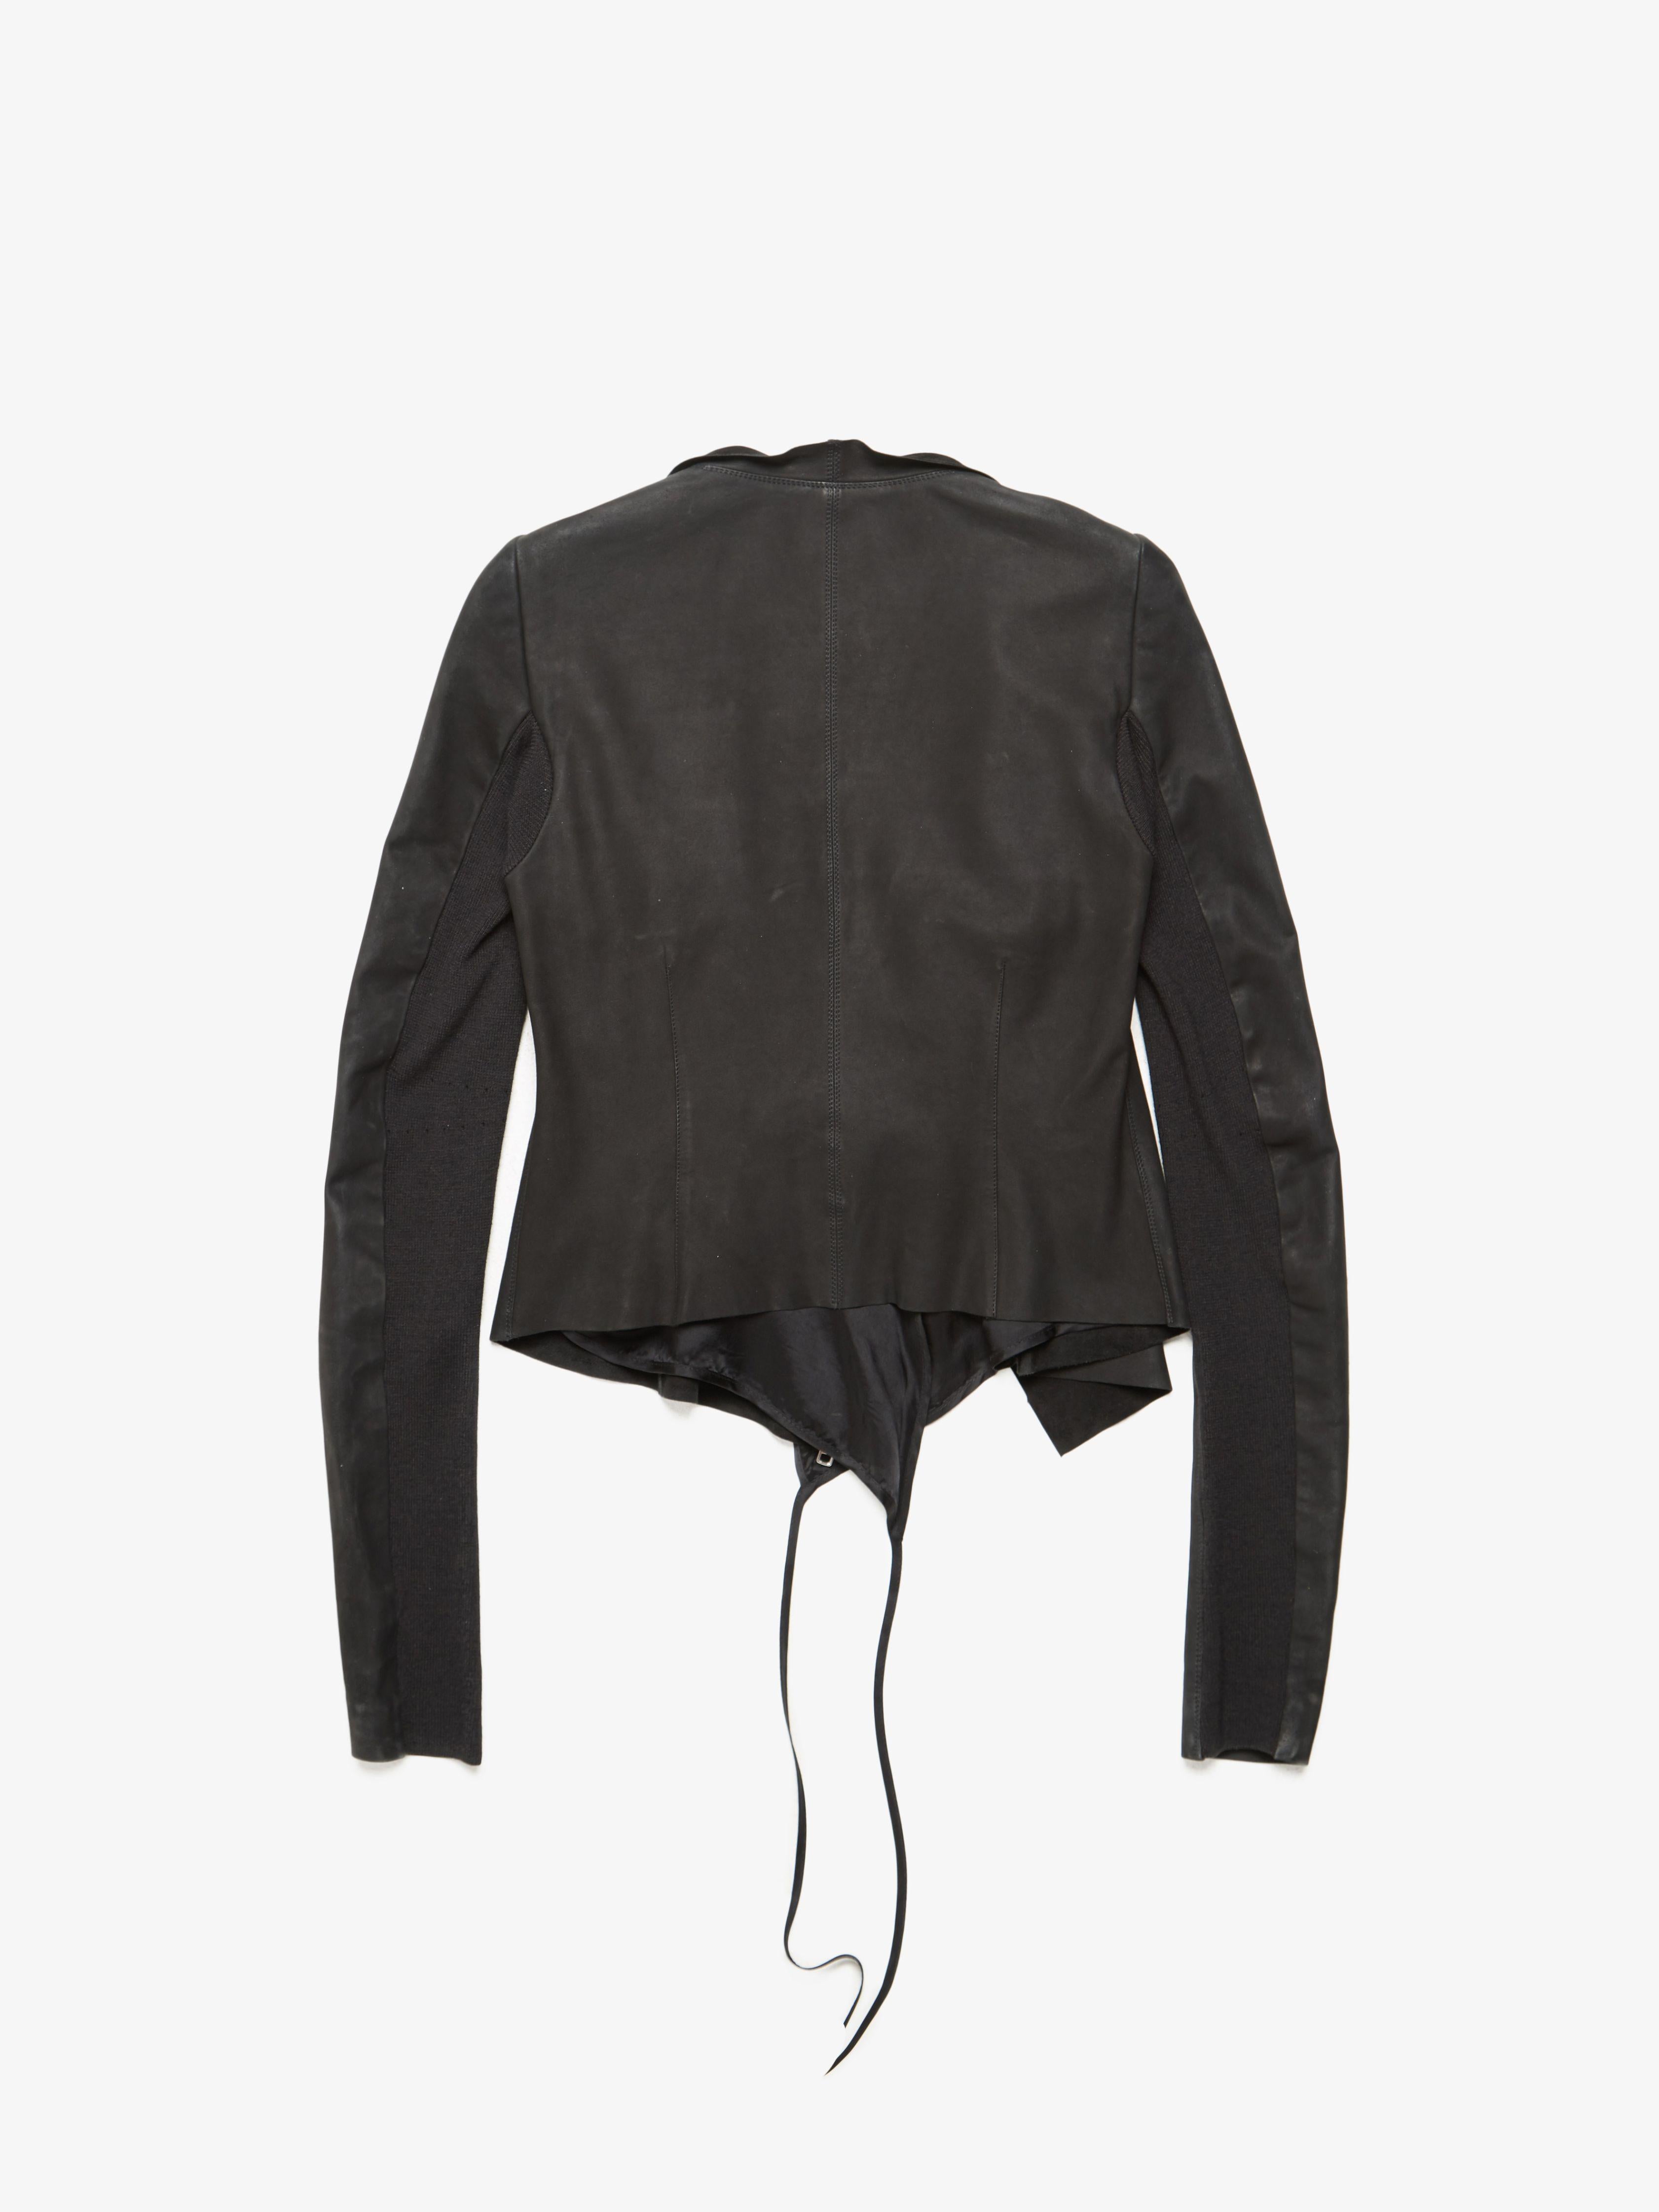 Rick Owens  Black Asymmetrical Zipped Leather Jacket
Size marked: 42
Condition: Gently used
Material: 100% Leather
Measurements: Shoulder to shoulder (cm) 38/ pit to pit (cm) 41/ Length (cm) 50/ sleeve (cm) 73/ waist (cm) 38
(76898)